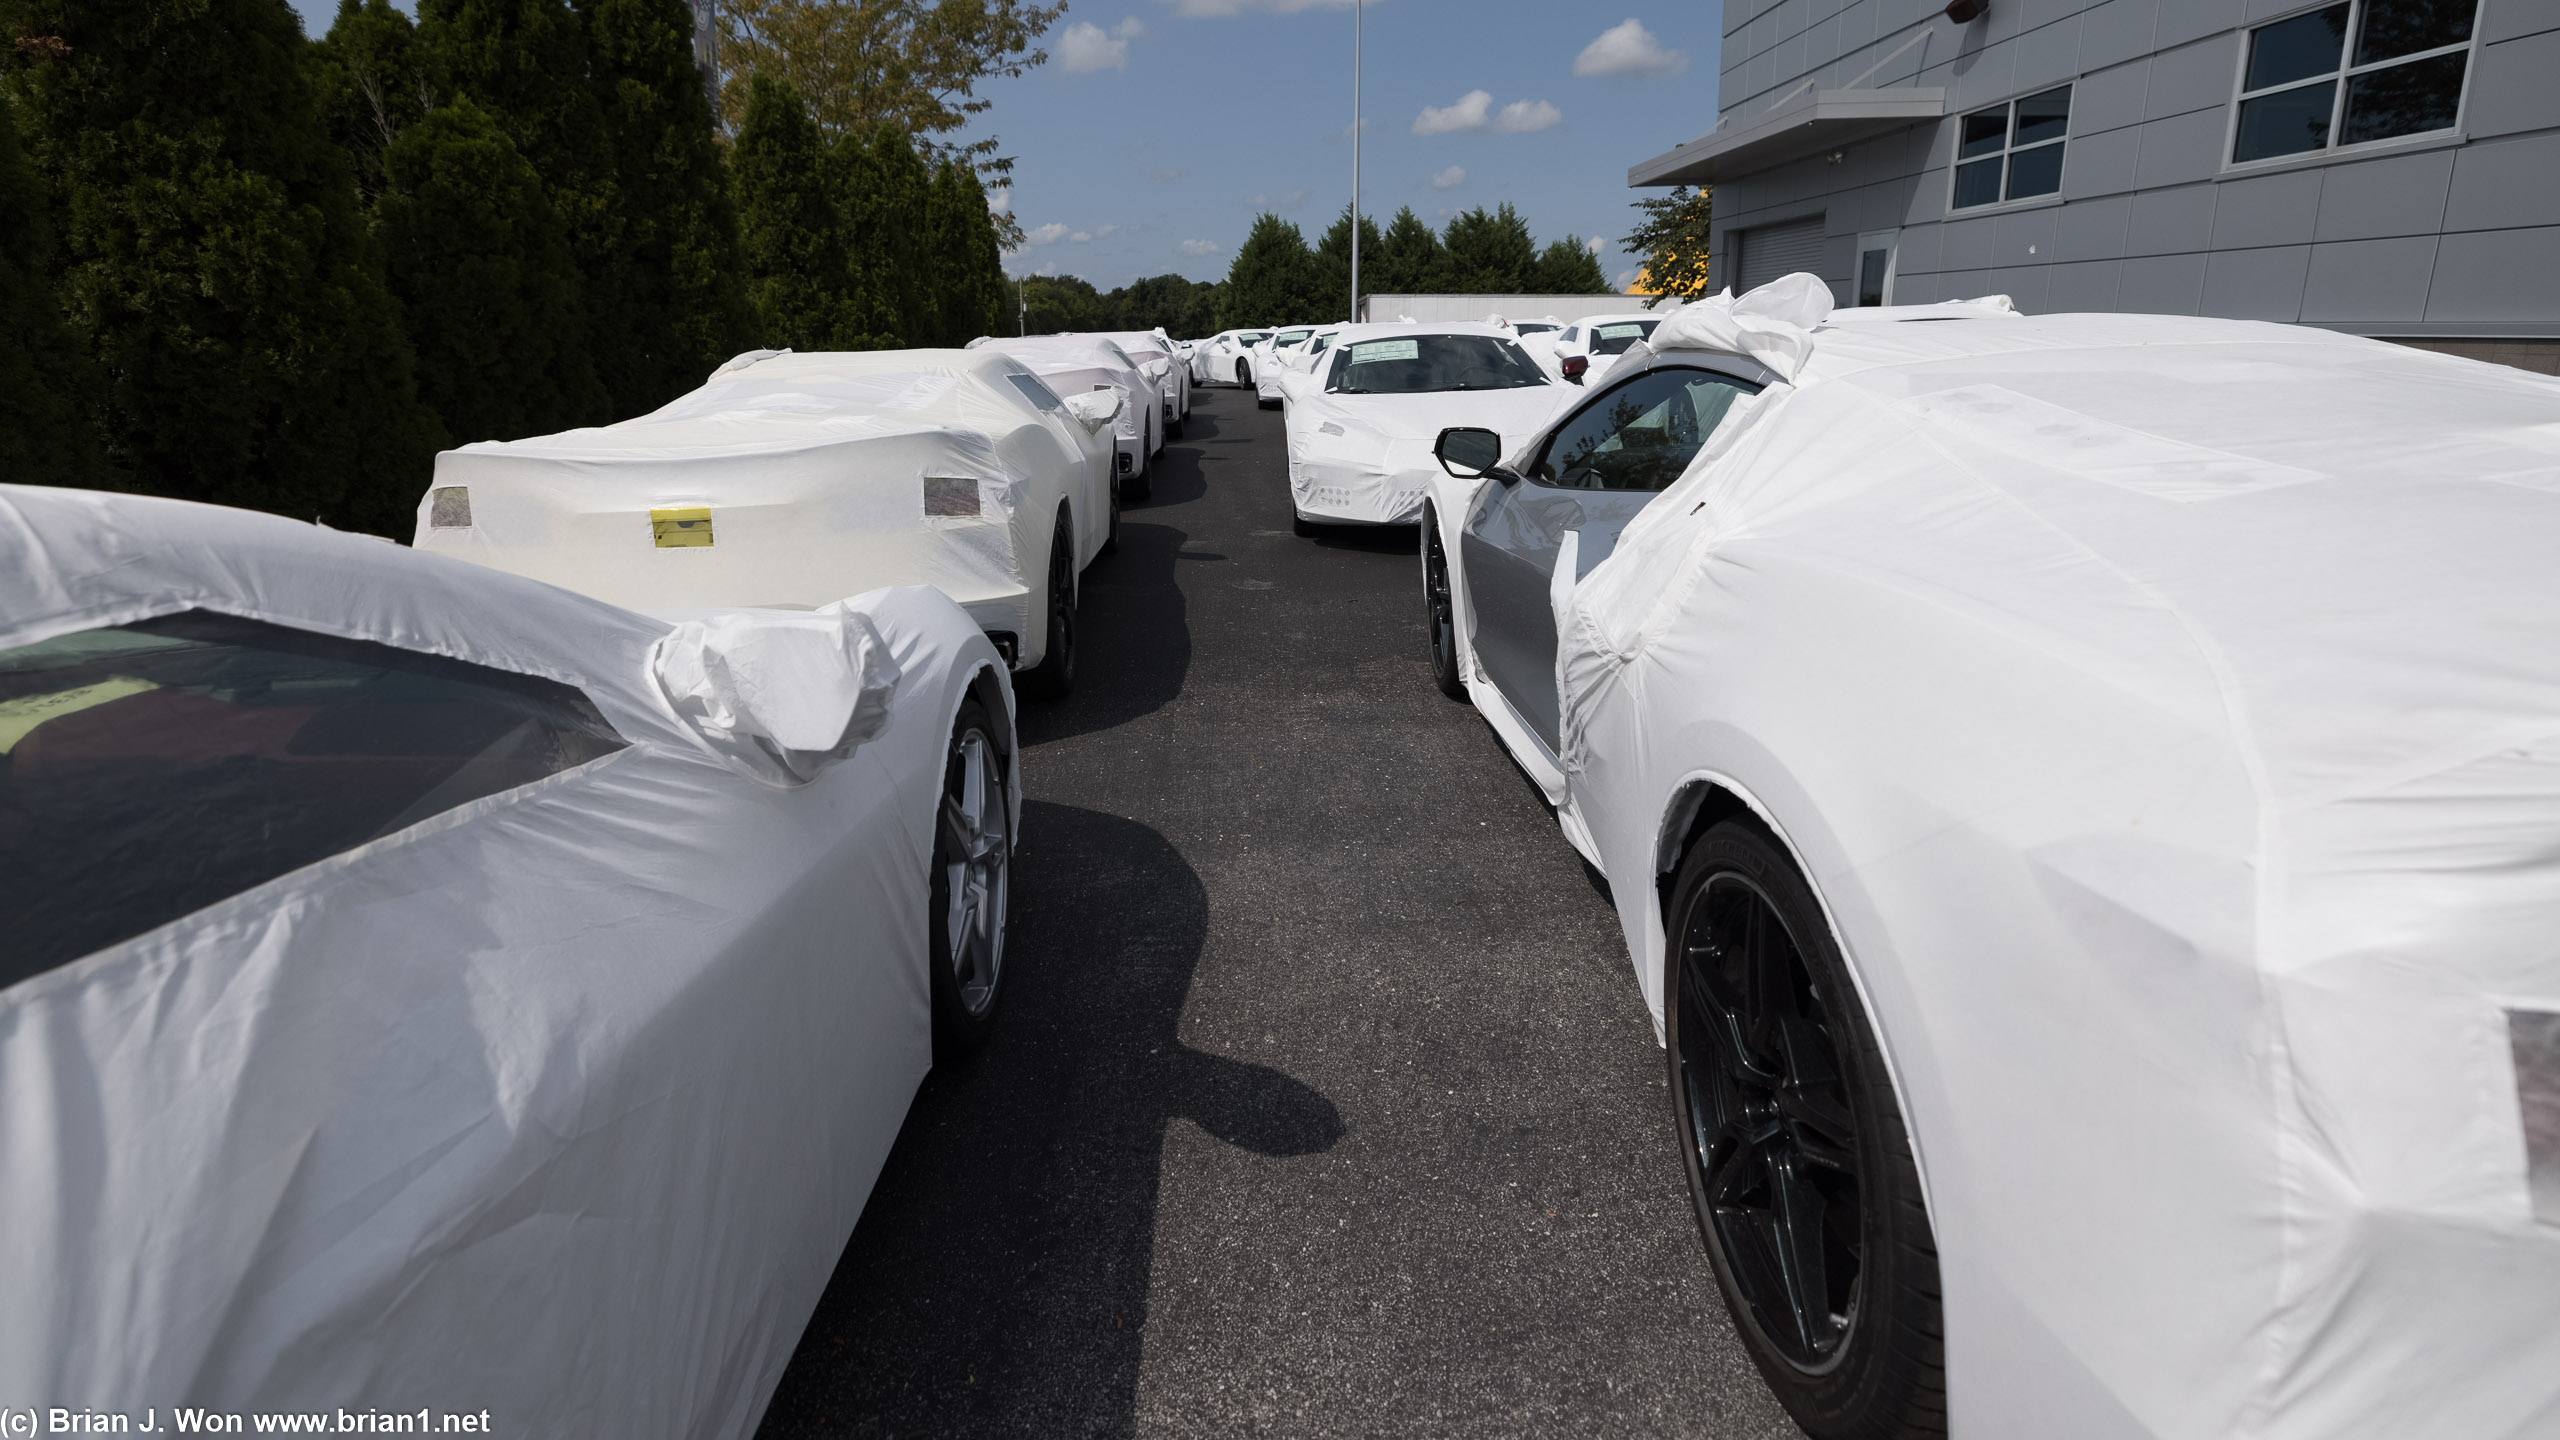 Rows and rows of new C8's.